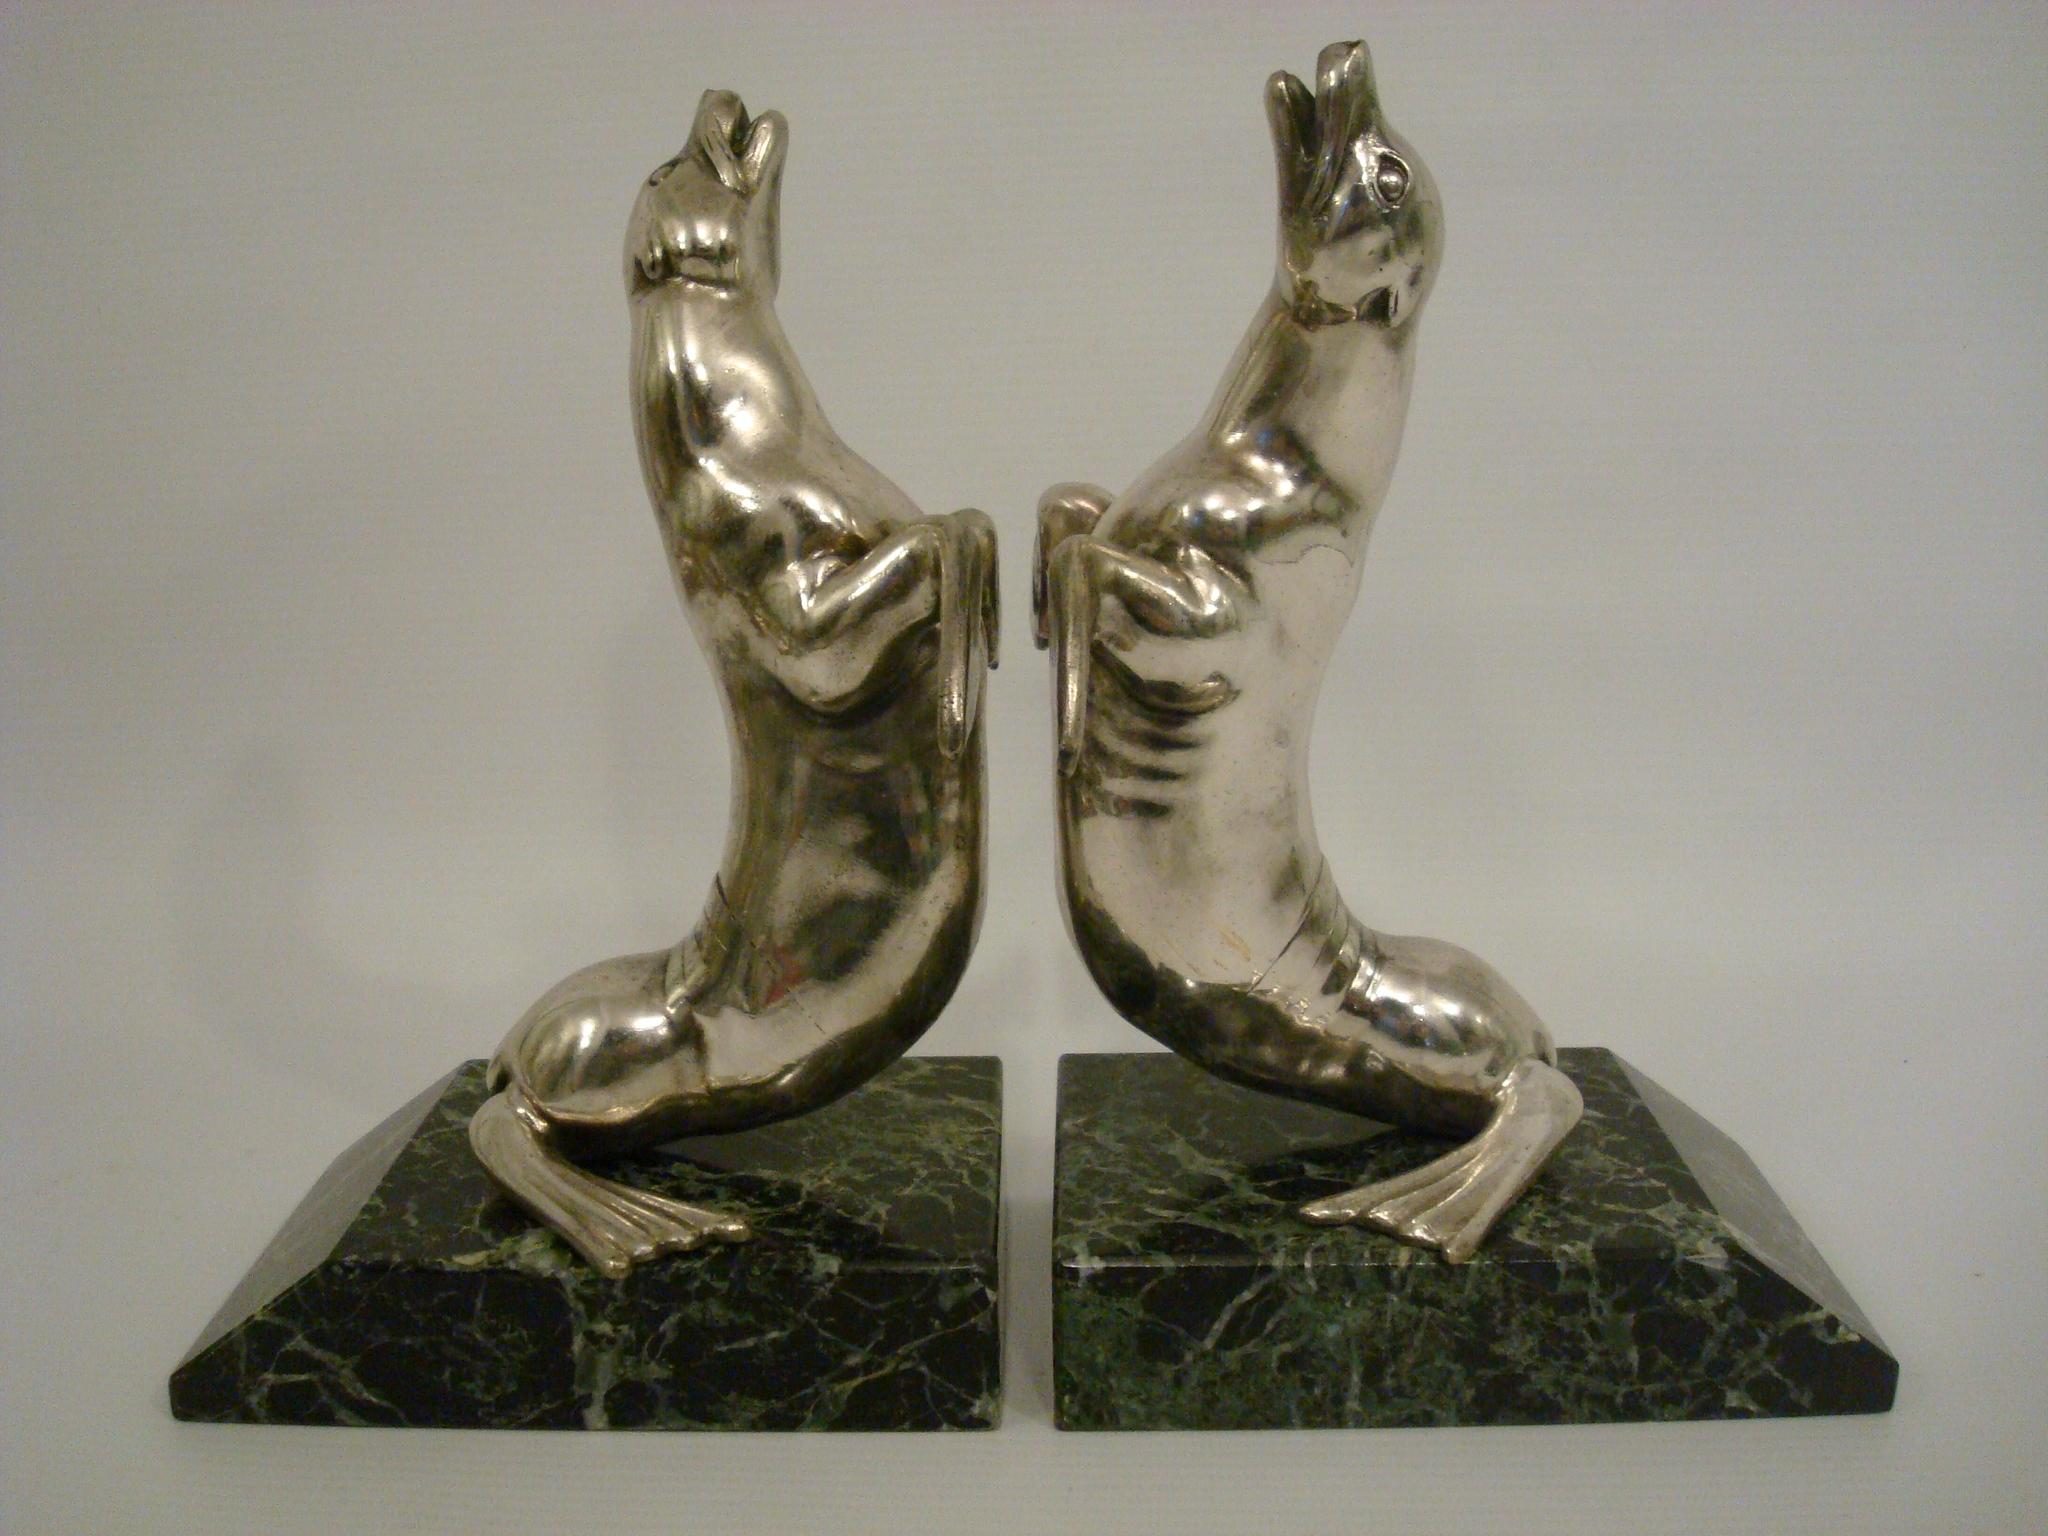 Nice pair of Art Deco seal bookends designed by the French artist Louis Albert Carvin, silvered white metal on a green marble base, France, 1930.

“Animals in bronze” by Christopher Payne. Antique collectors club.?